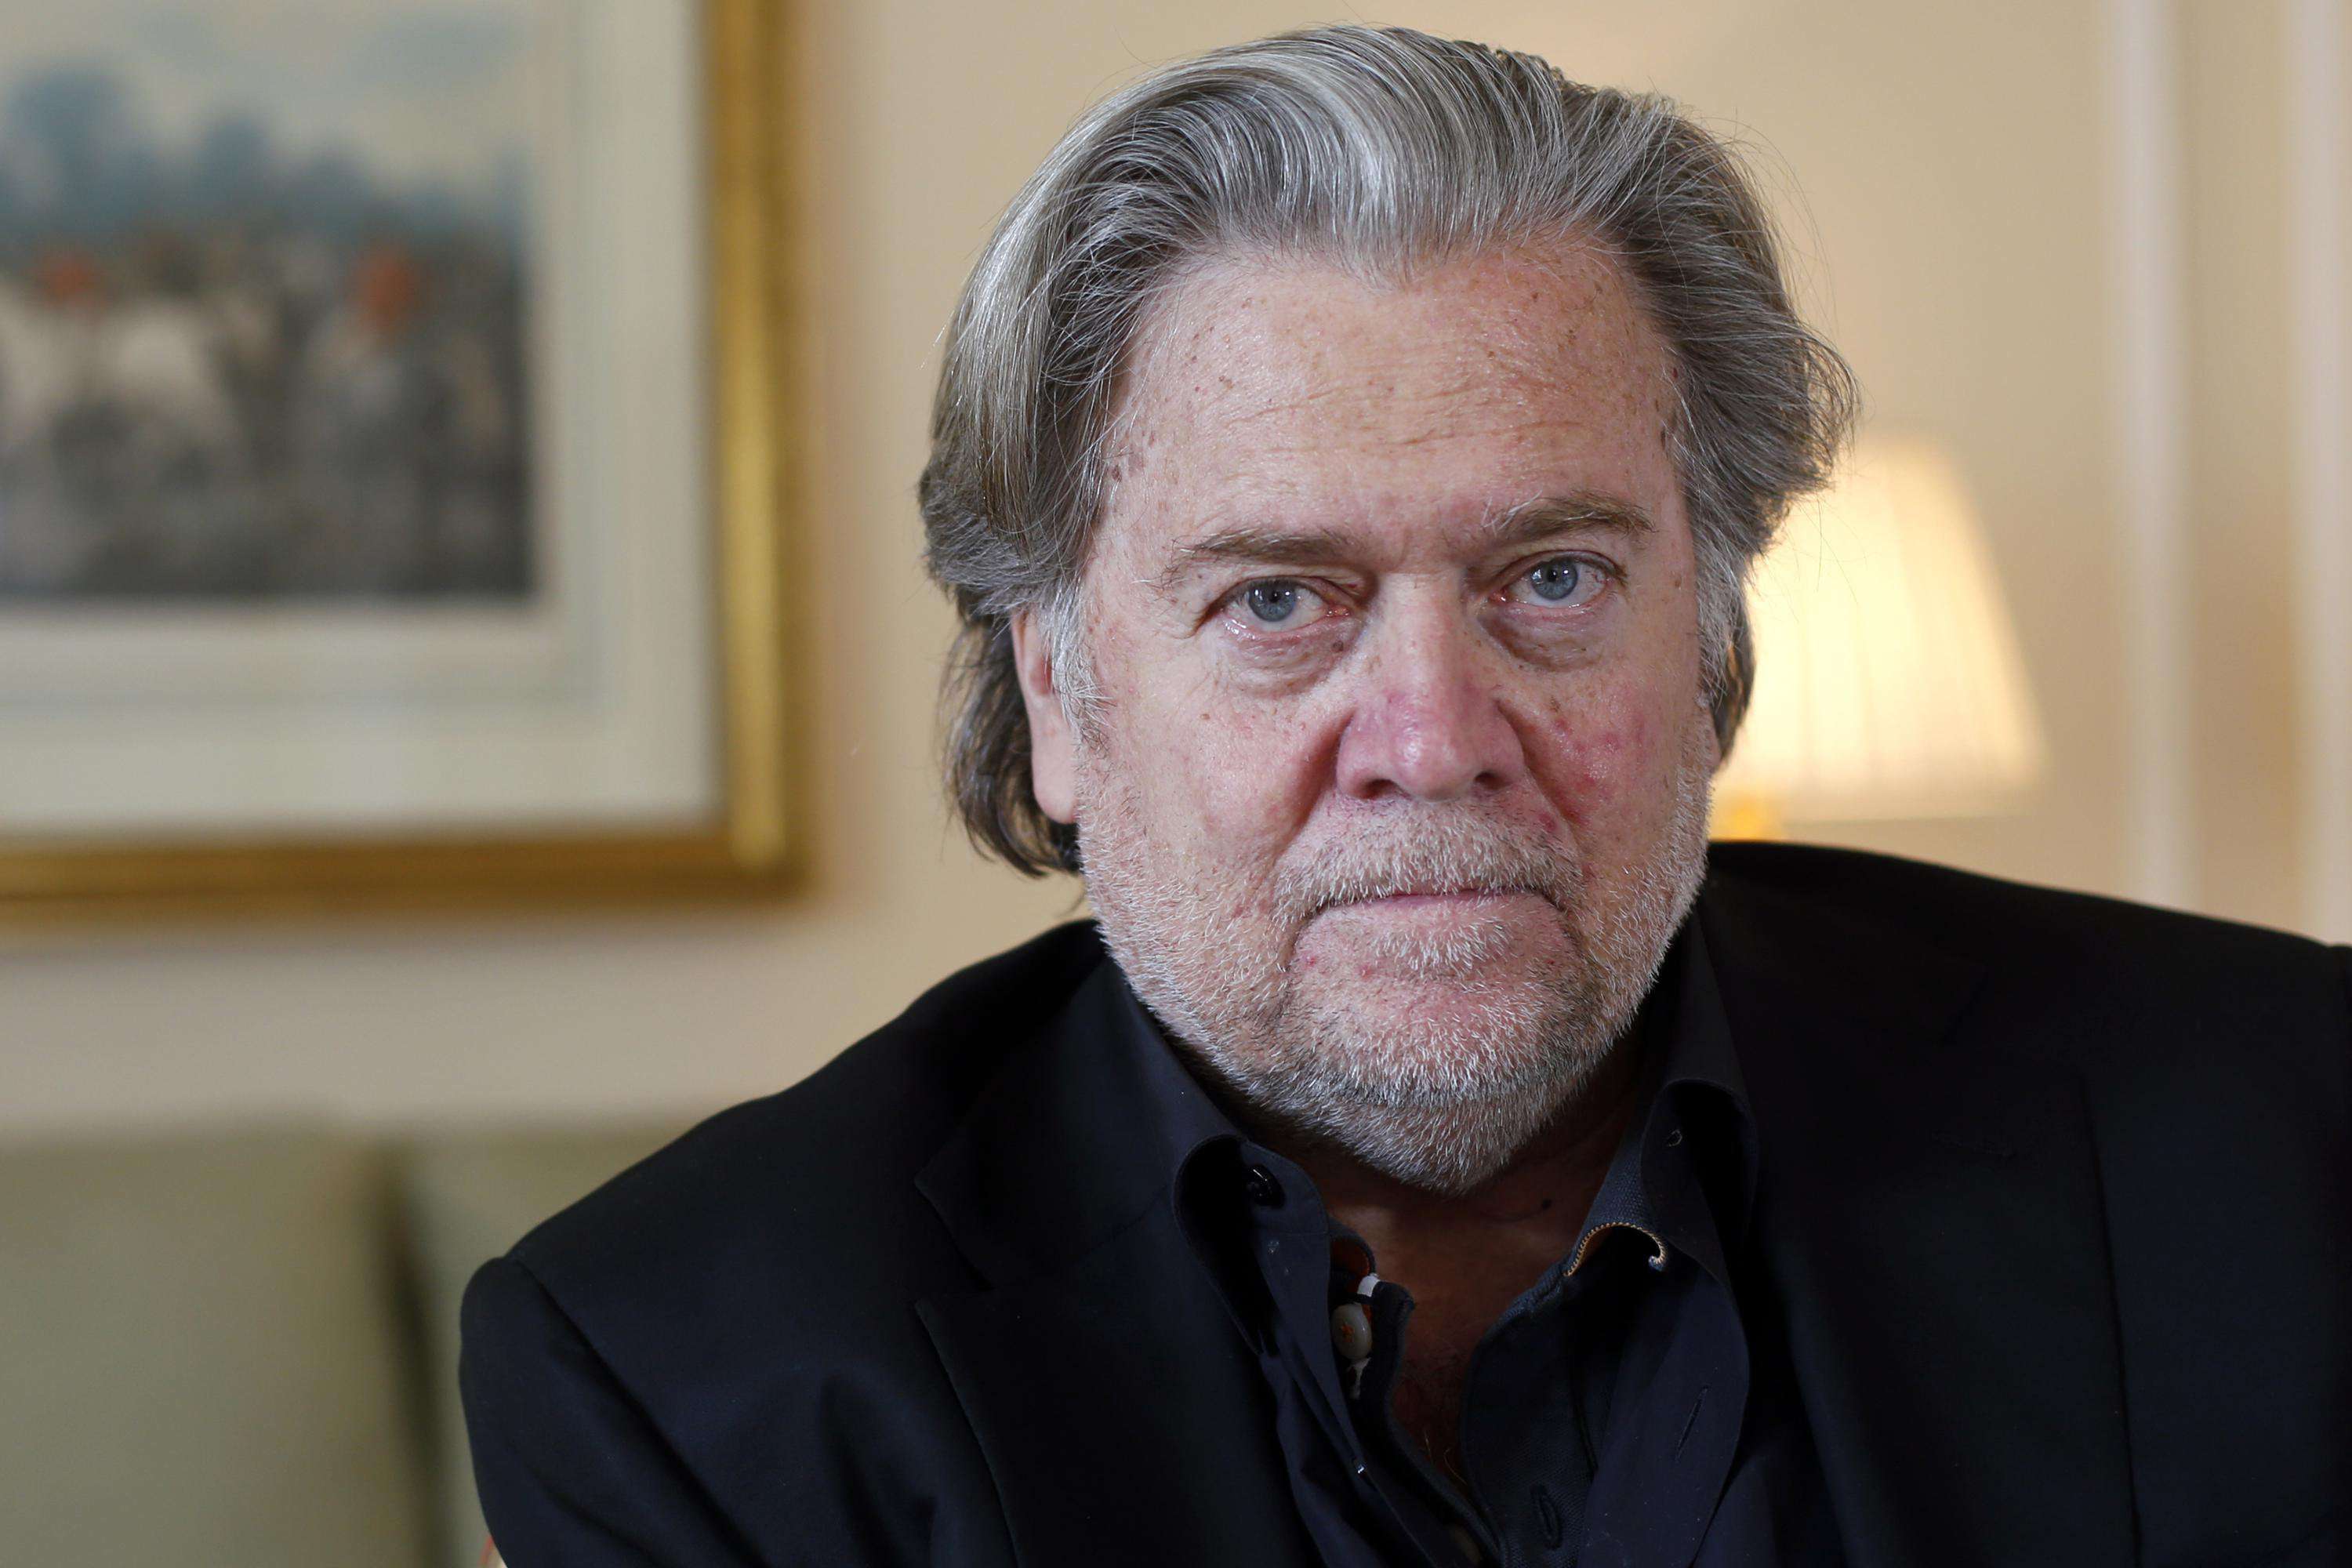 image for Trump ally Bannon talks tough after court appearance